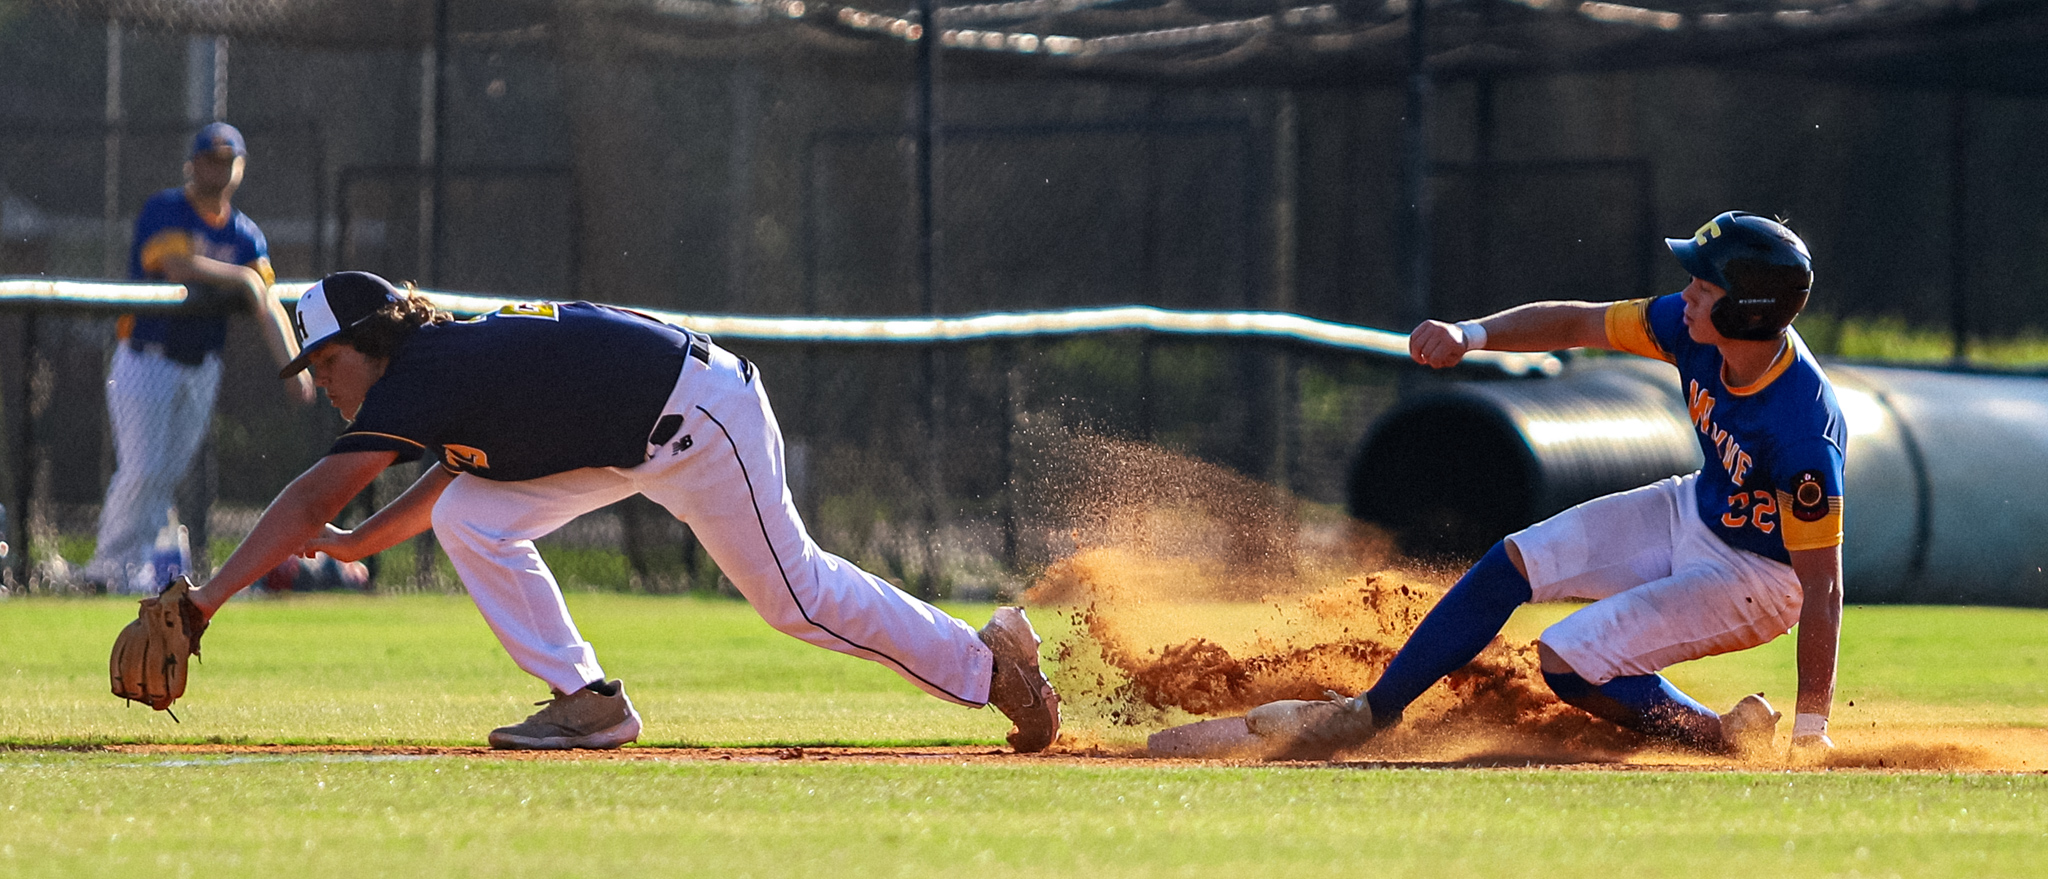 Baseball: Wayne County Gets First Win Against Hamlet County Post 49 (PHOTO GALLERY)